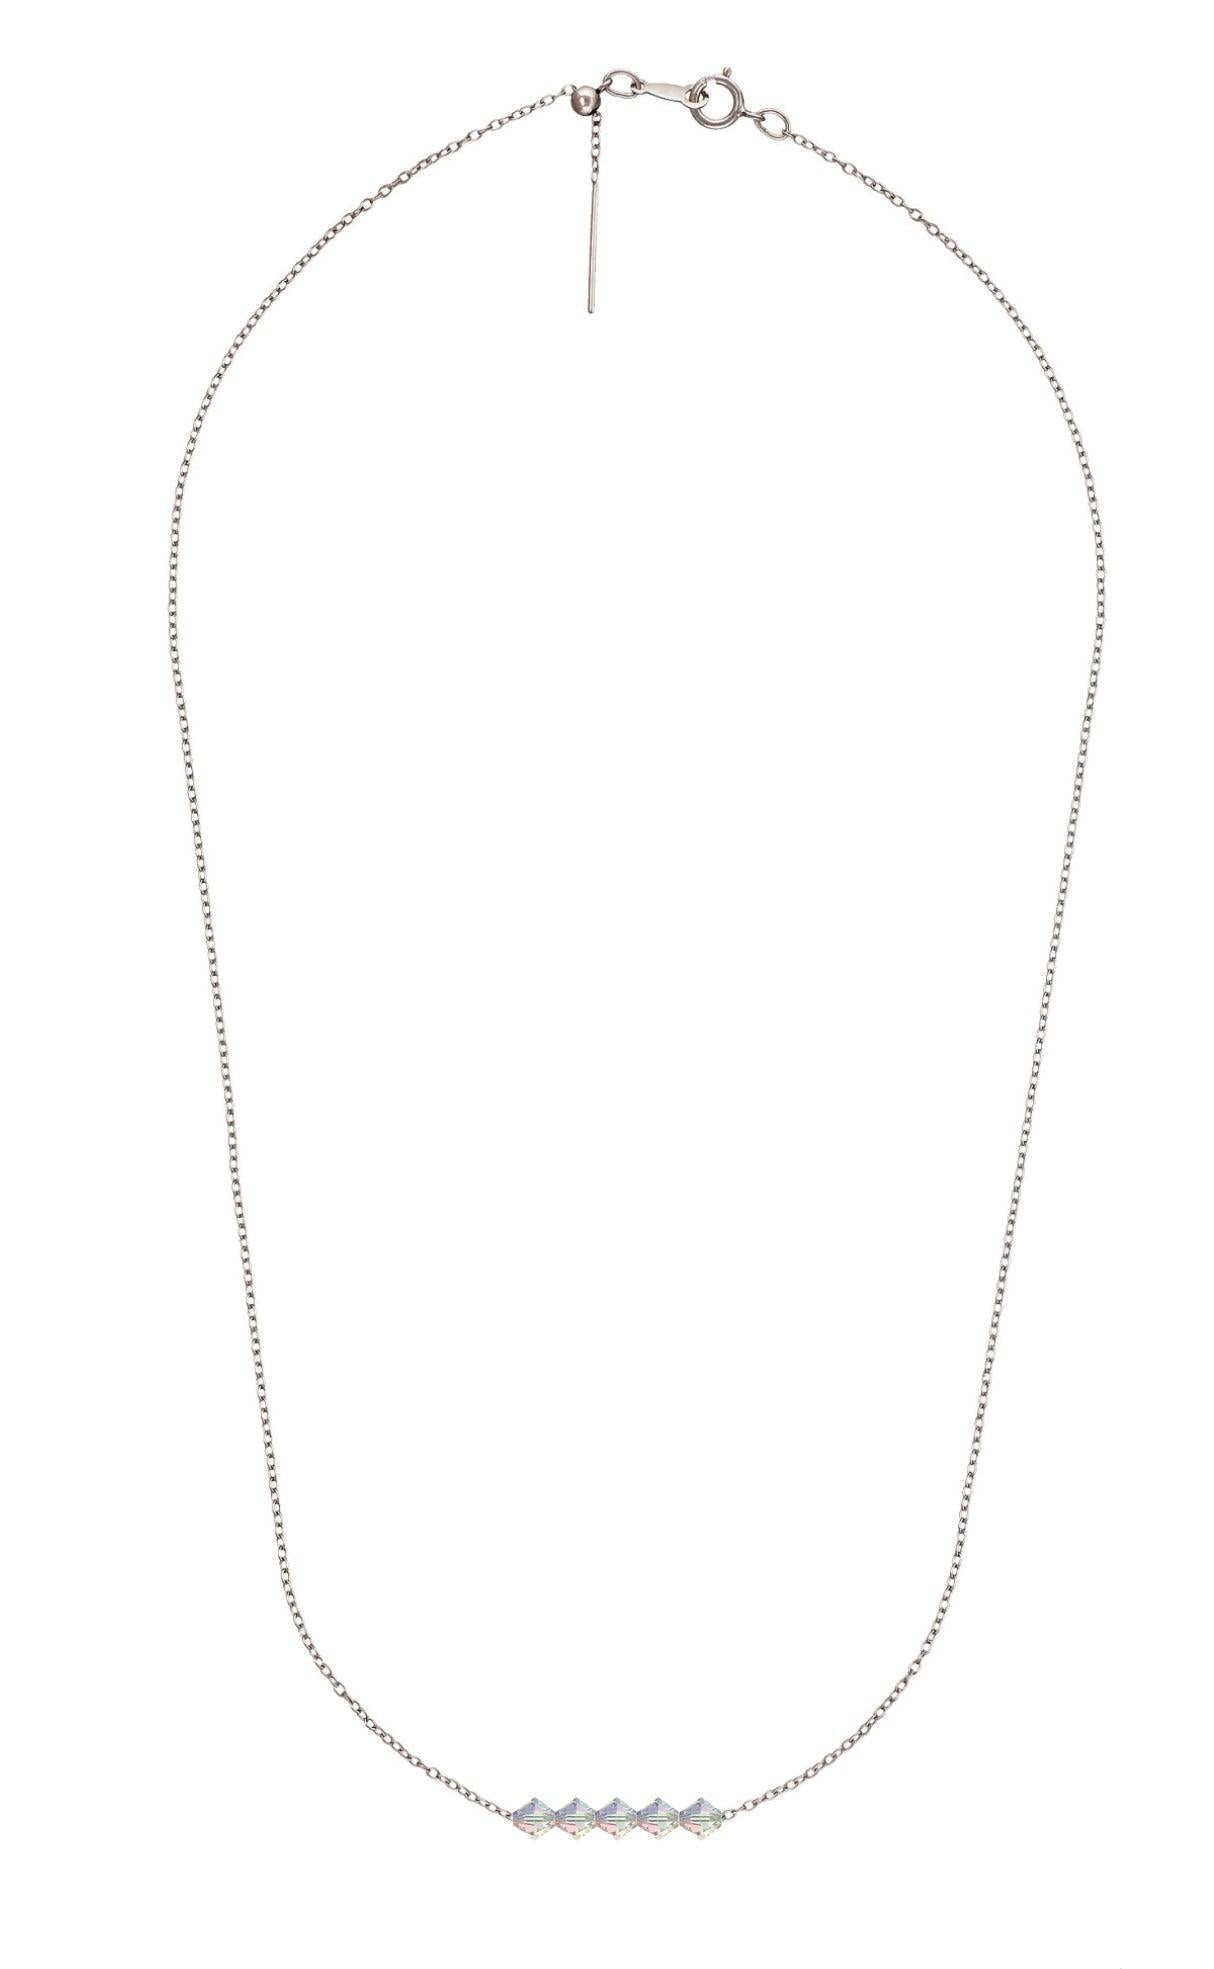 .925 Sterling silver Add-A-Bead Cable Chain Necklace - Adjustable (1 Piece)